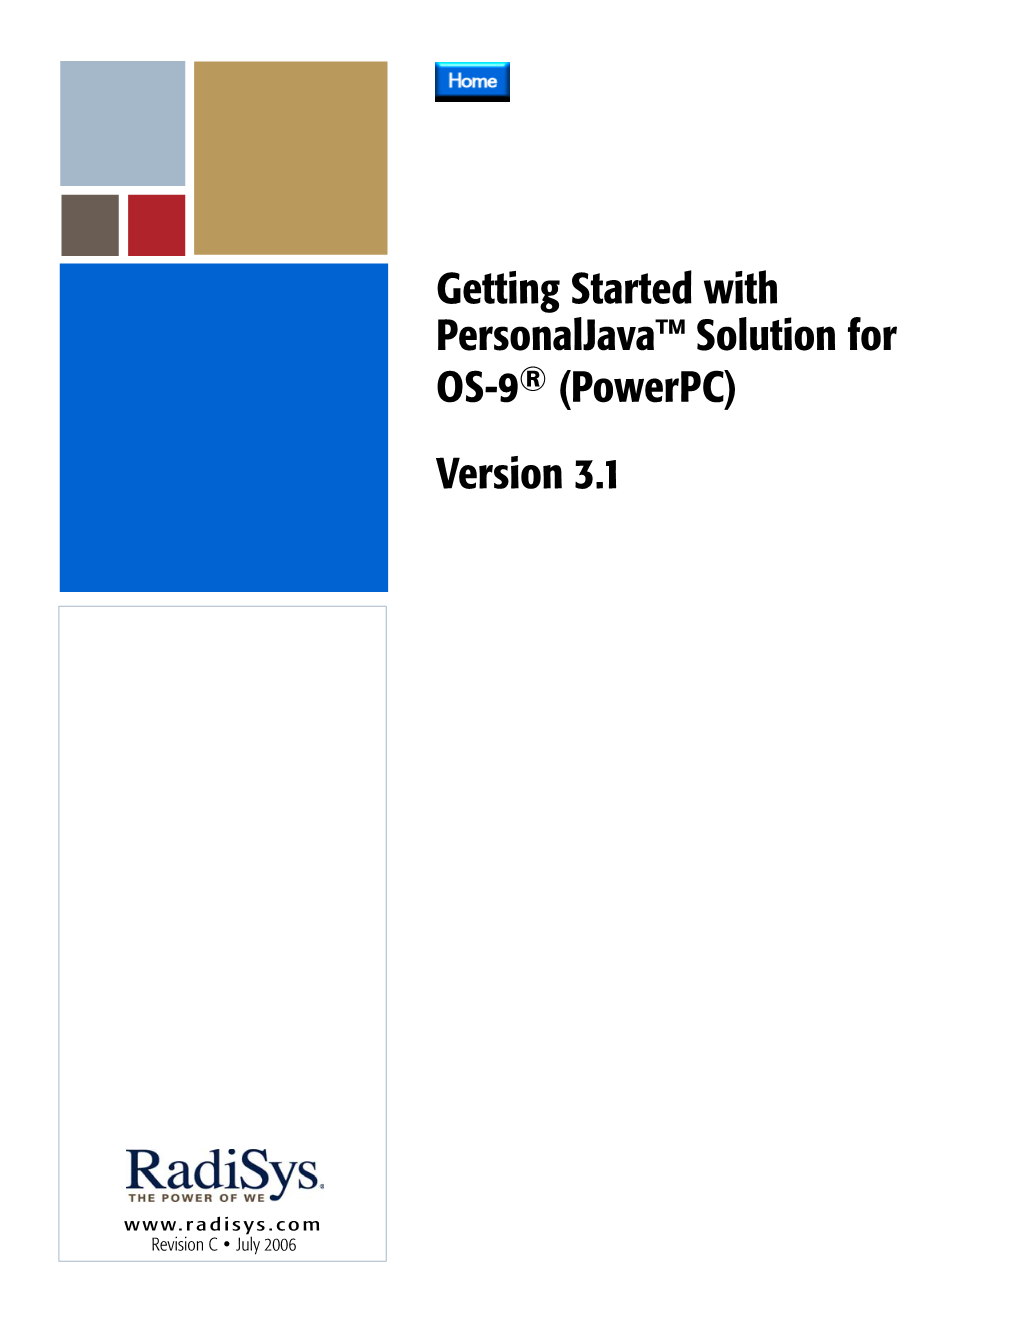 Getting Started with Personaljava Solution for OS-9 (Powerpc)